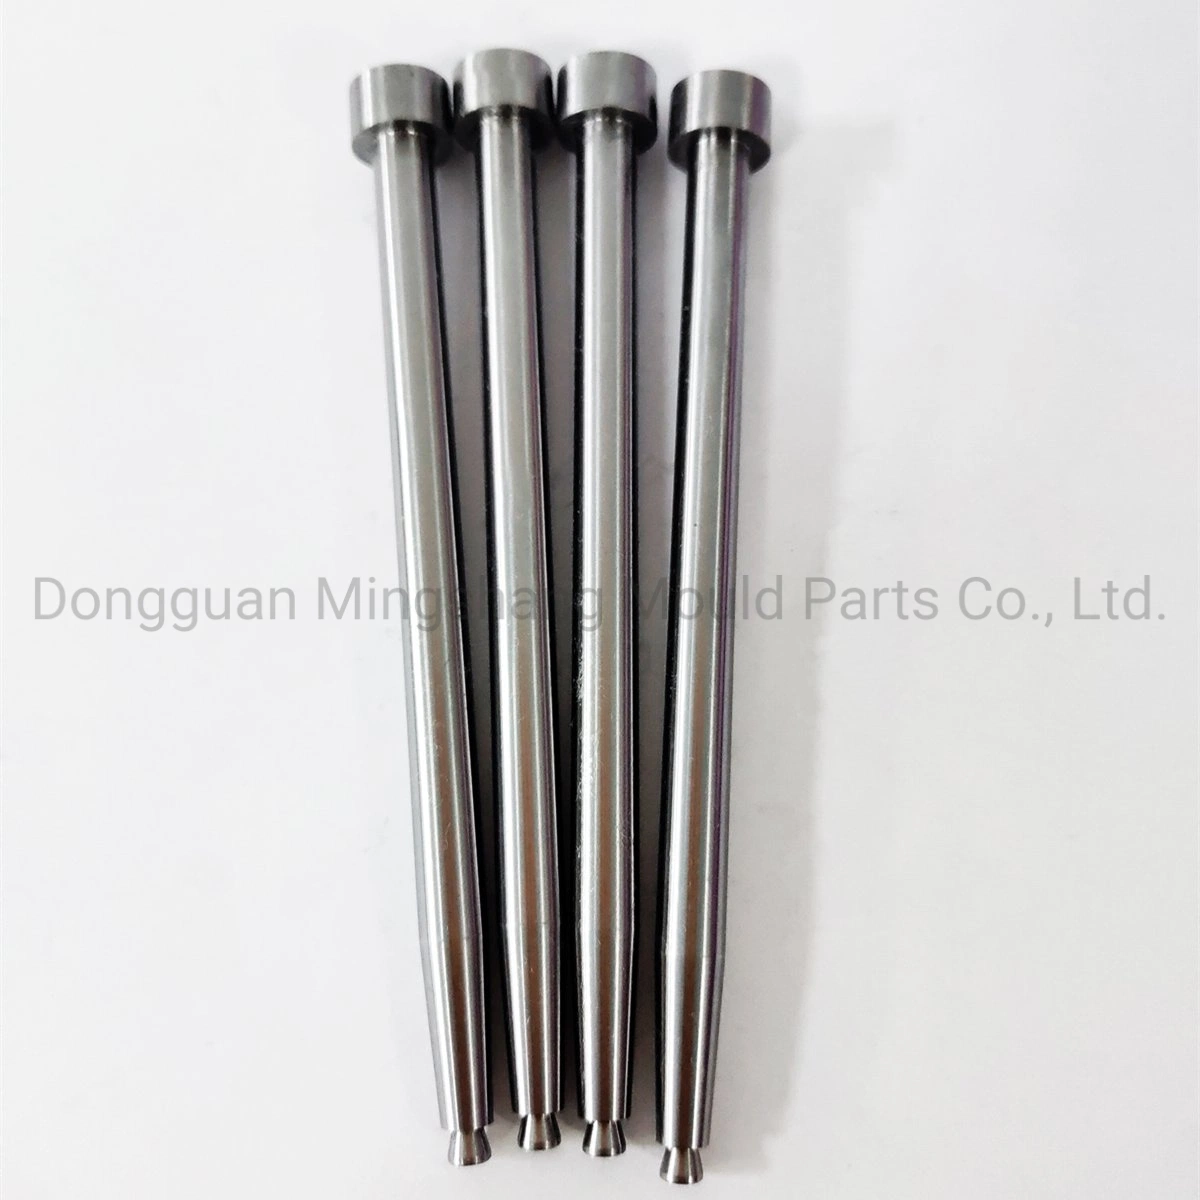 0.005mm Tolerance Skh51 HSS Smooth Mold Ejector Pins and Sleeves with Surface Treatment for Injection Moulding Process